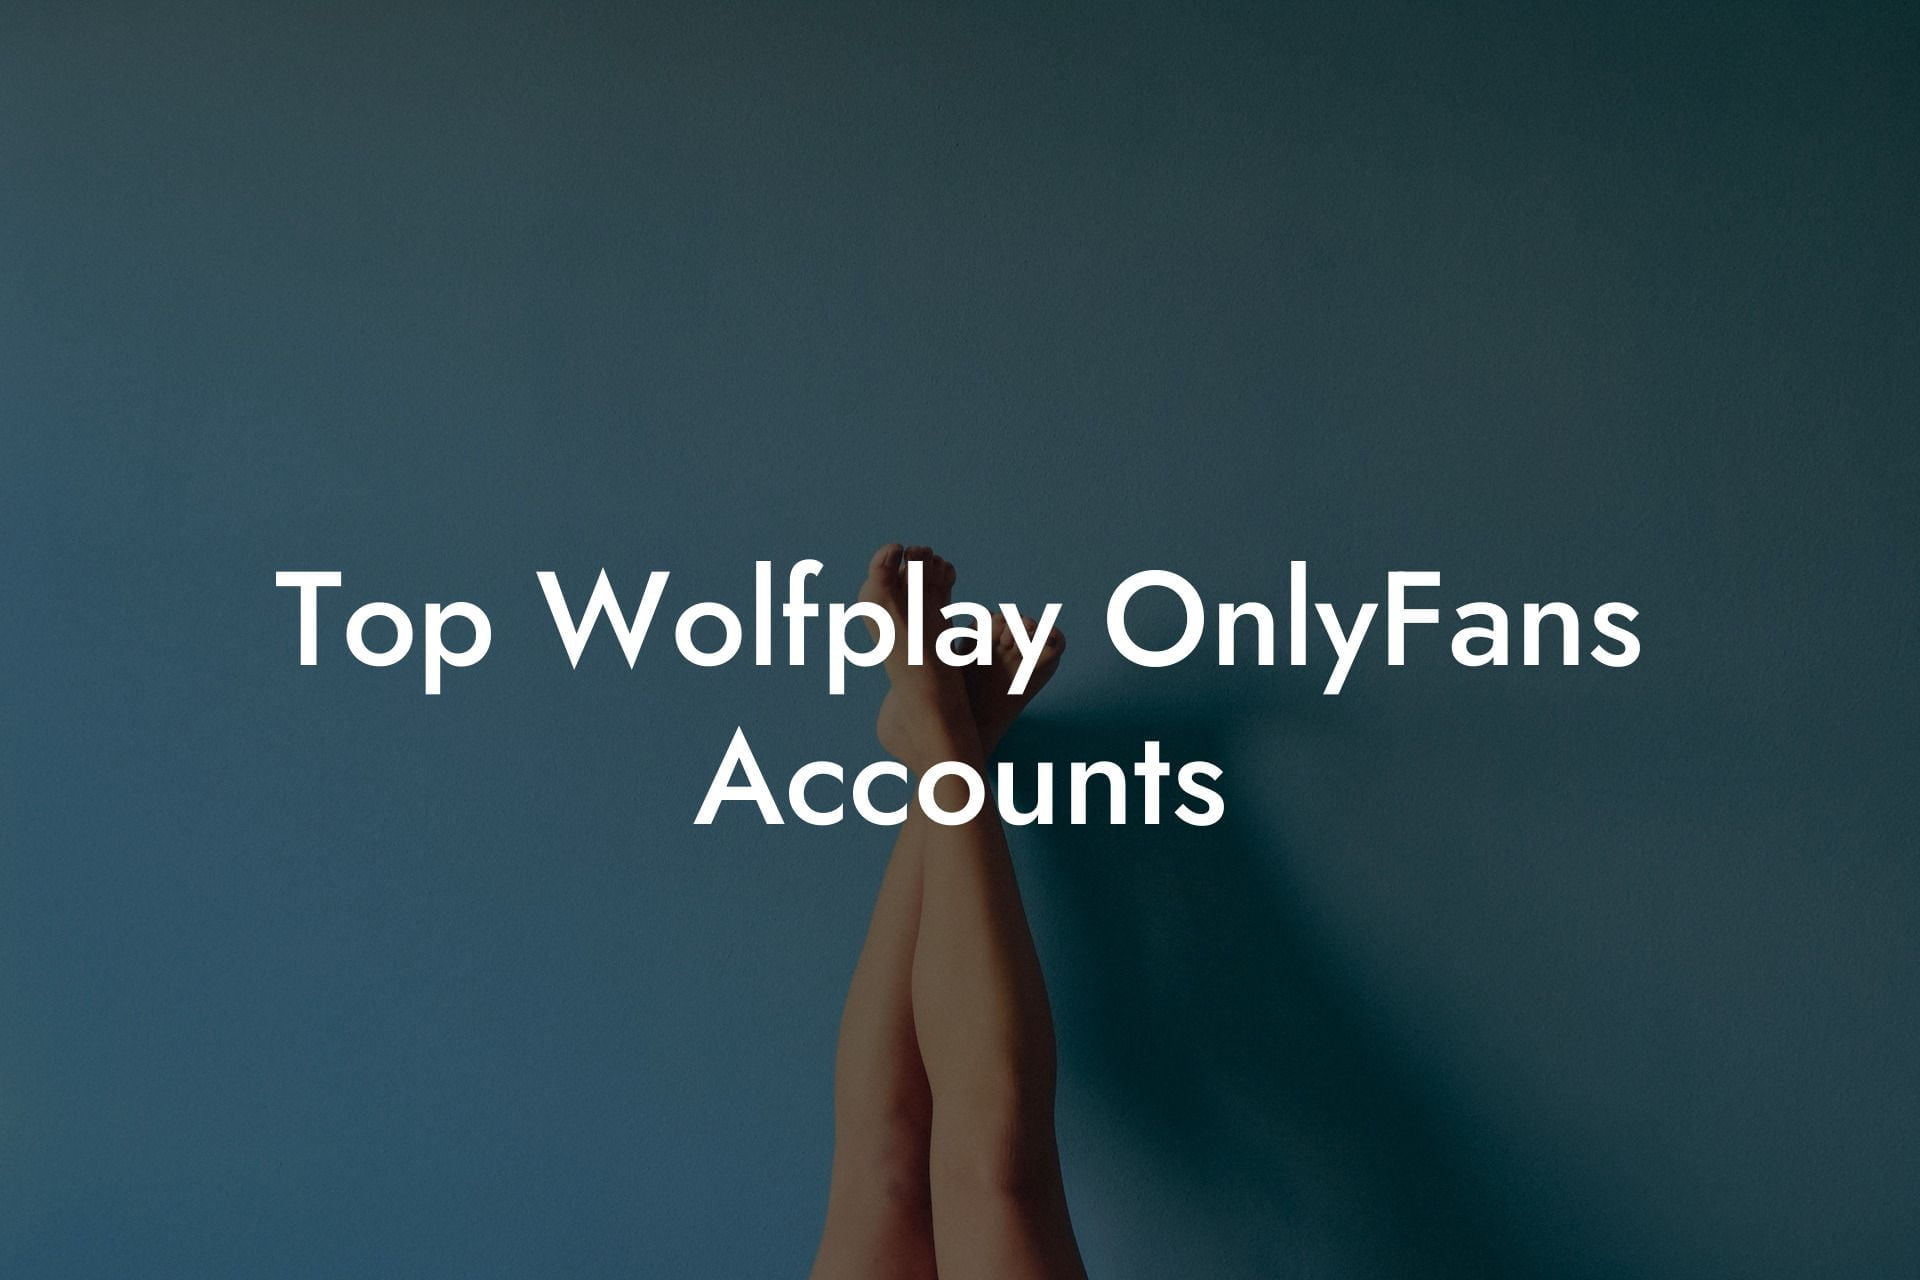 Top Wolfplay OnlyFans Accounts